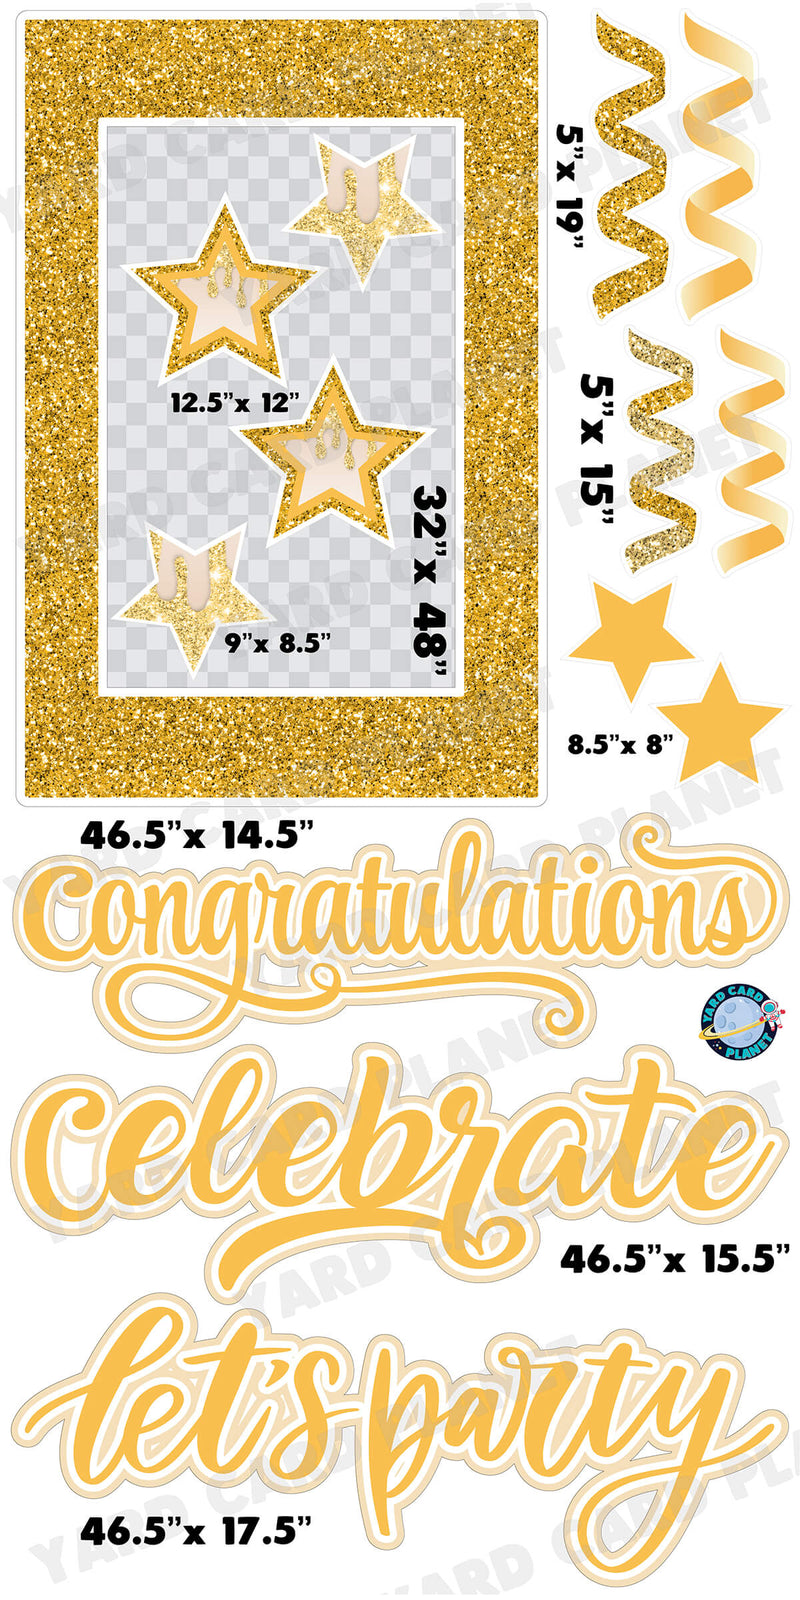 Gold Glitter Multi Purpose EZ Frame with Interchangeable Greetings and Matching Yard Card Flair Set